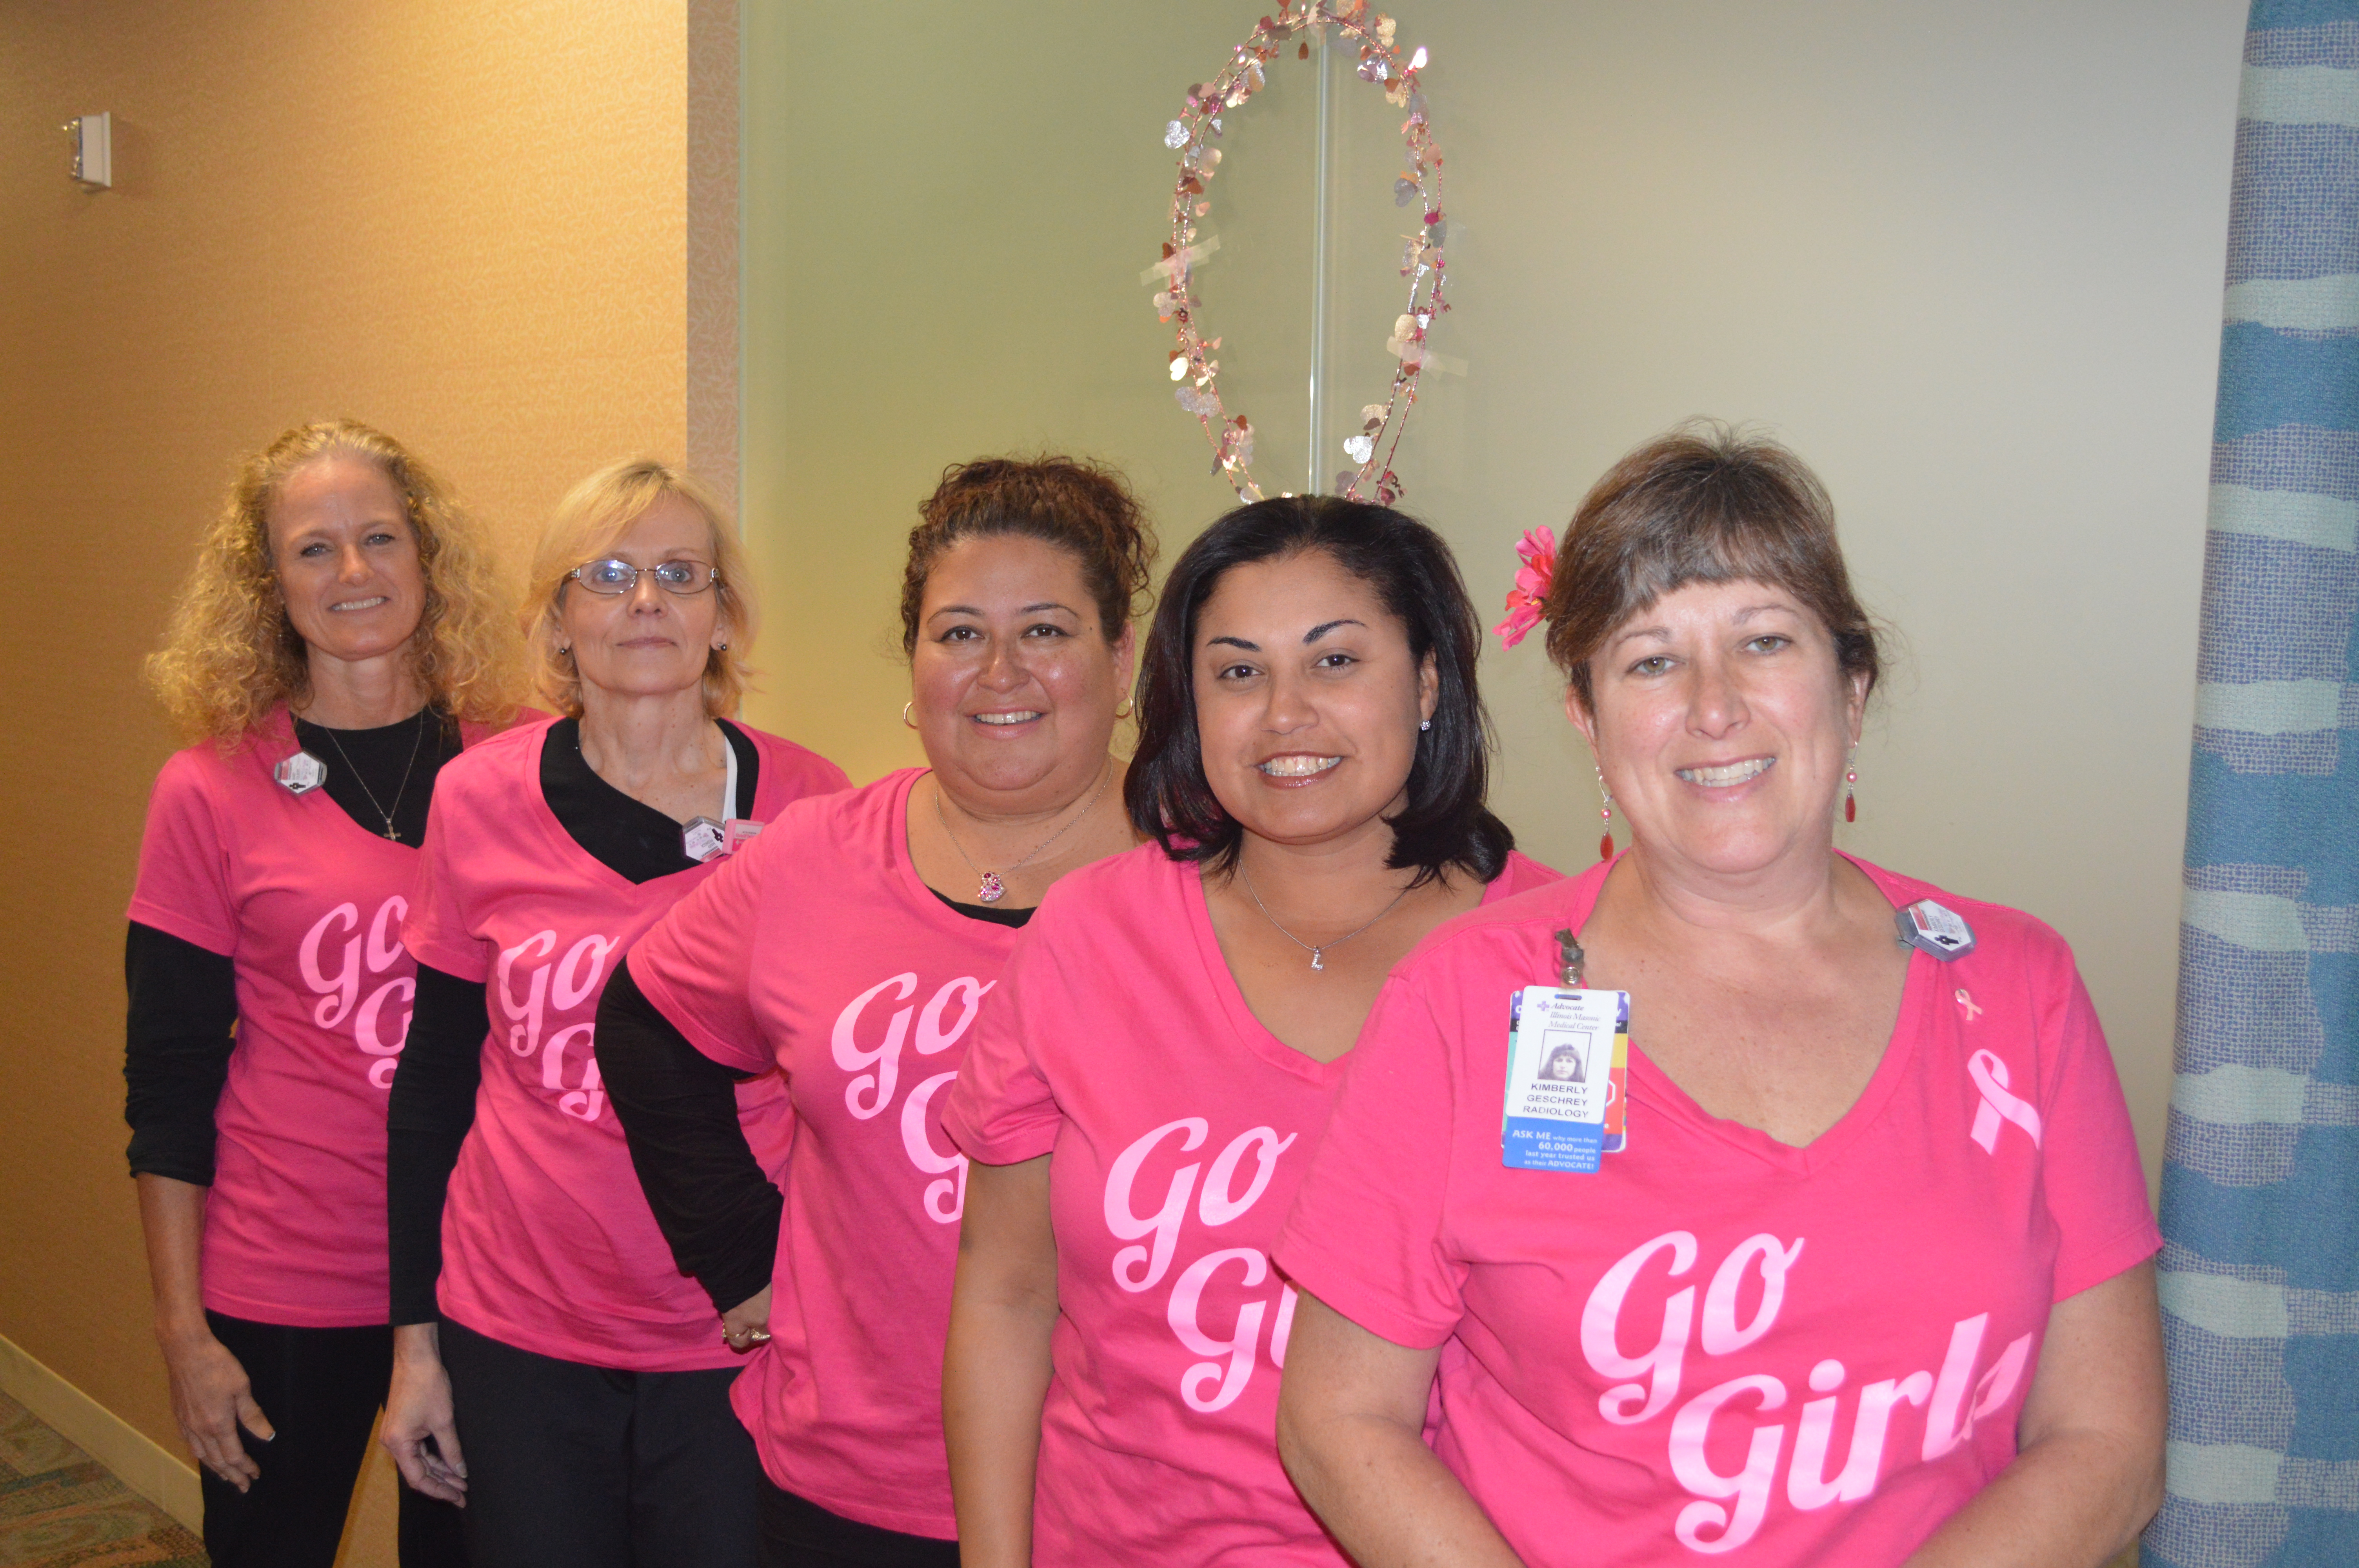 These ladies at Advocate Illinois Masonic Medical Center are spreading the word about breast cancer by wearing pink.